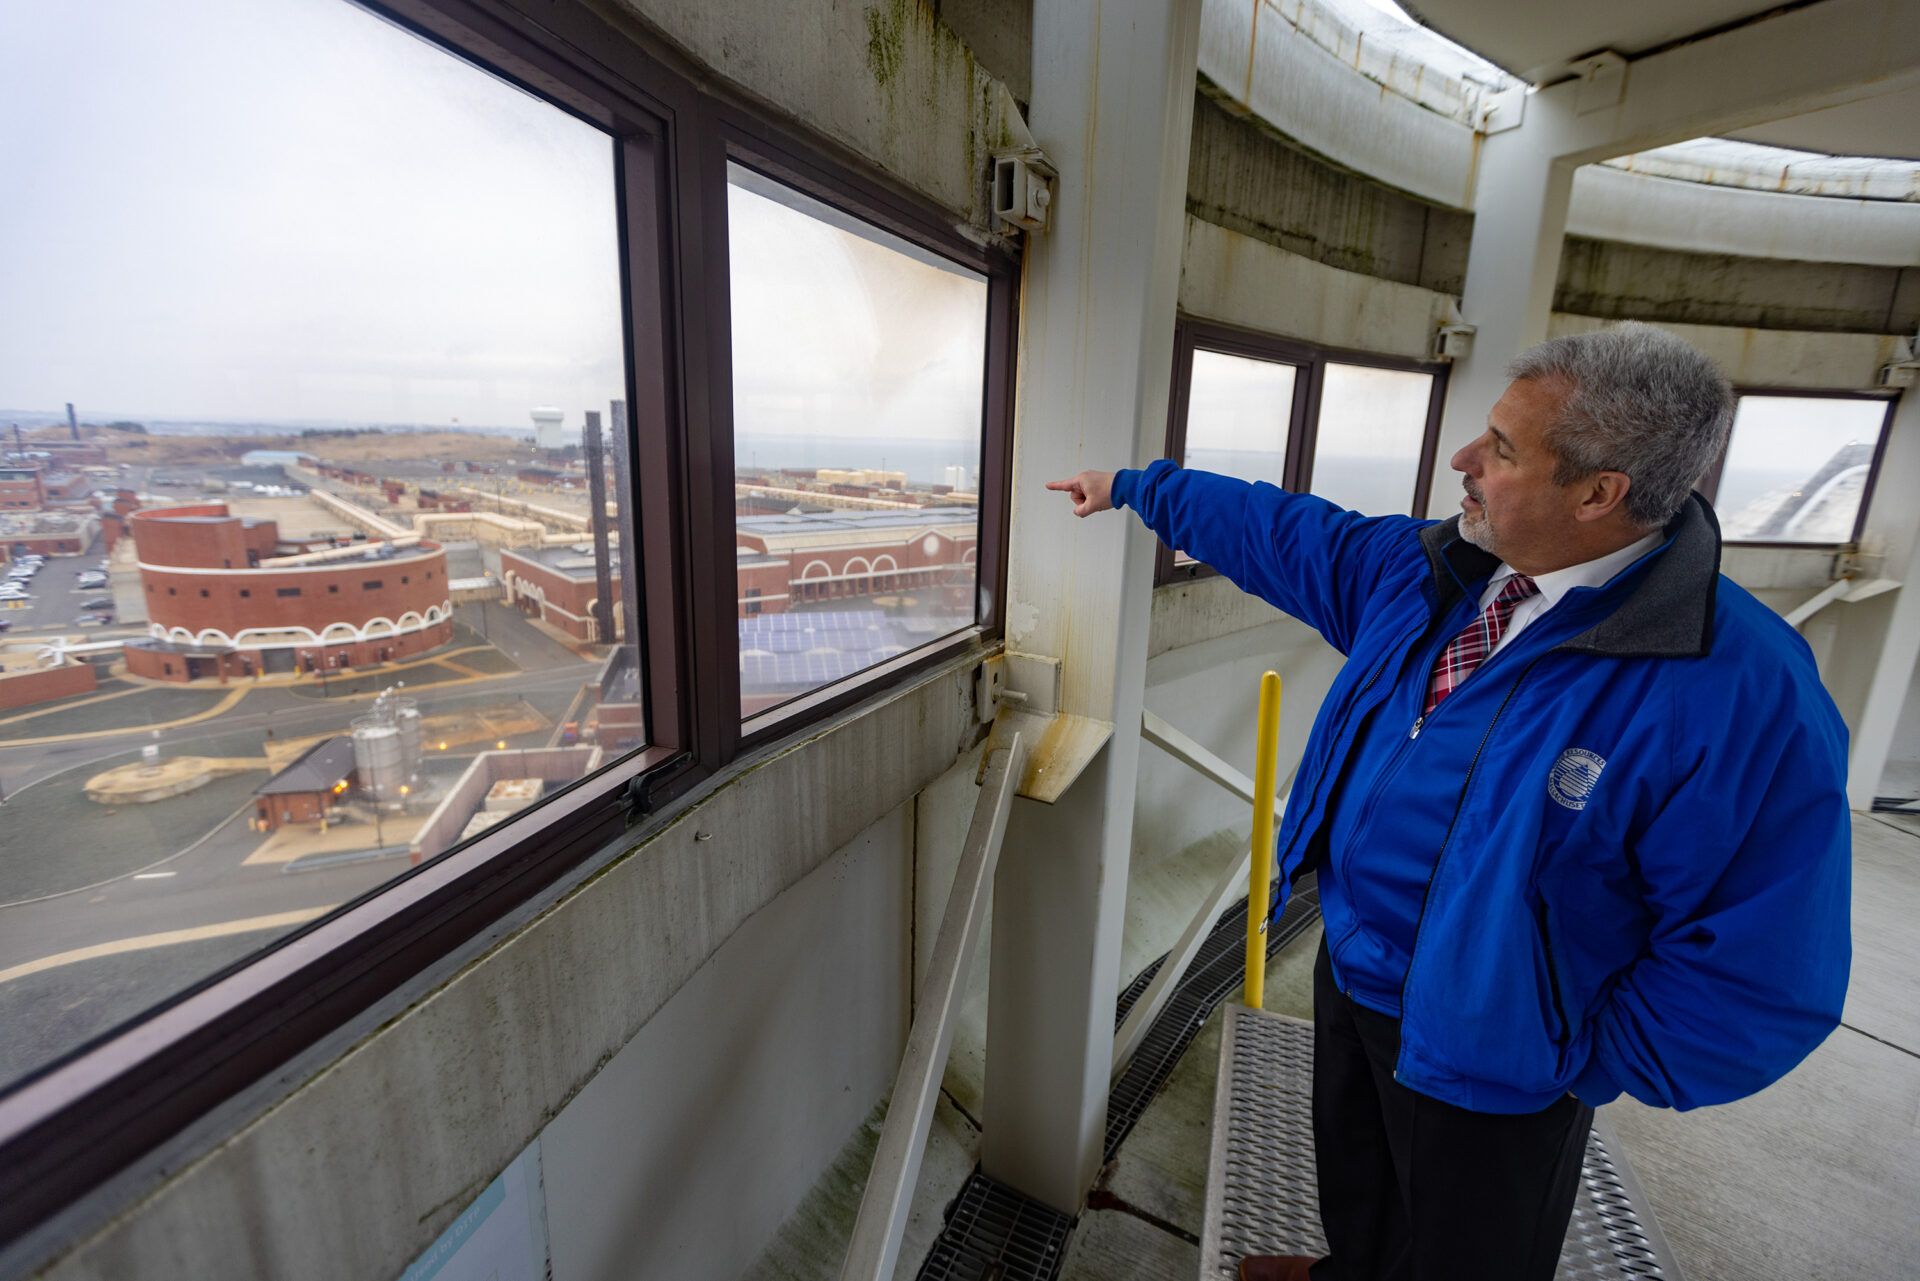 A man points out a window towards a water treatment facility